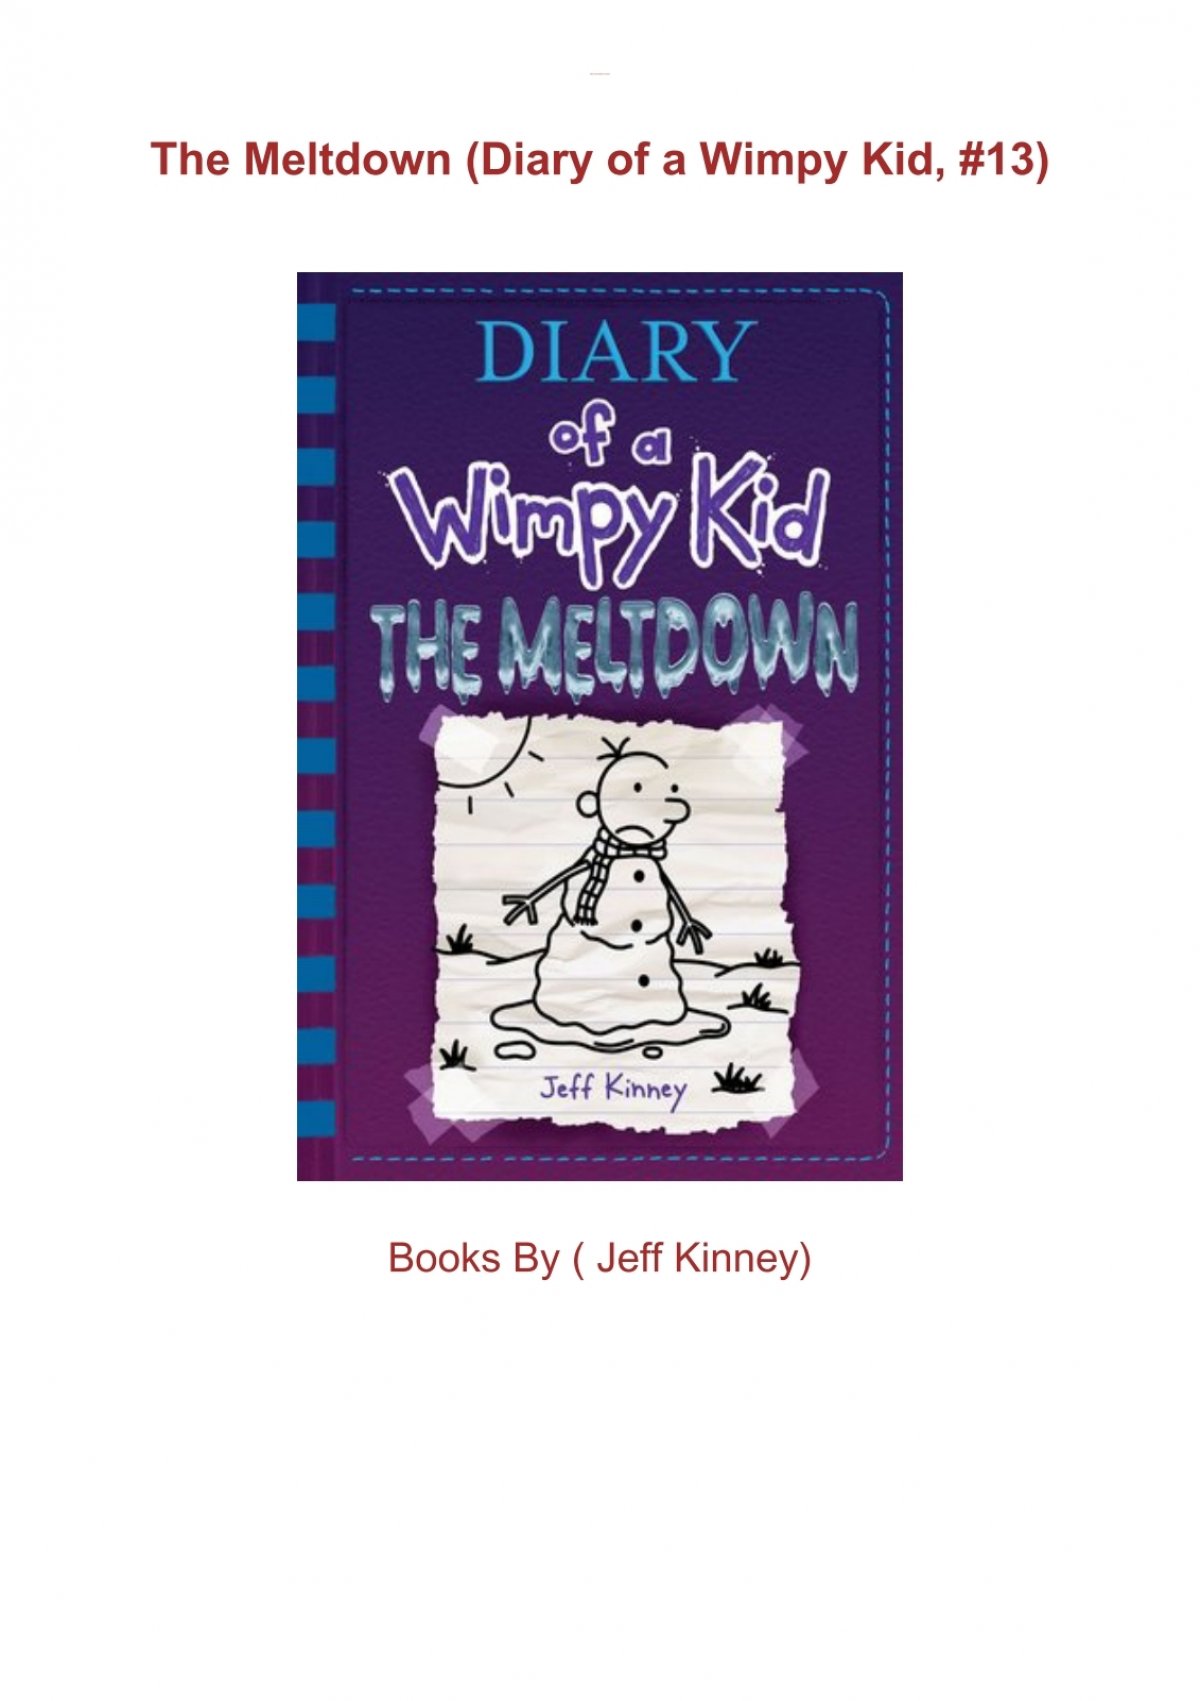 Diary of a Wimpy Kid XIII : The Meltdown by Jeff Kinney Pages 1-50 - Flip  PDF Download